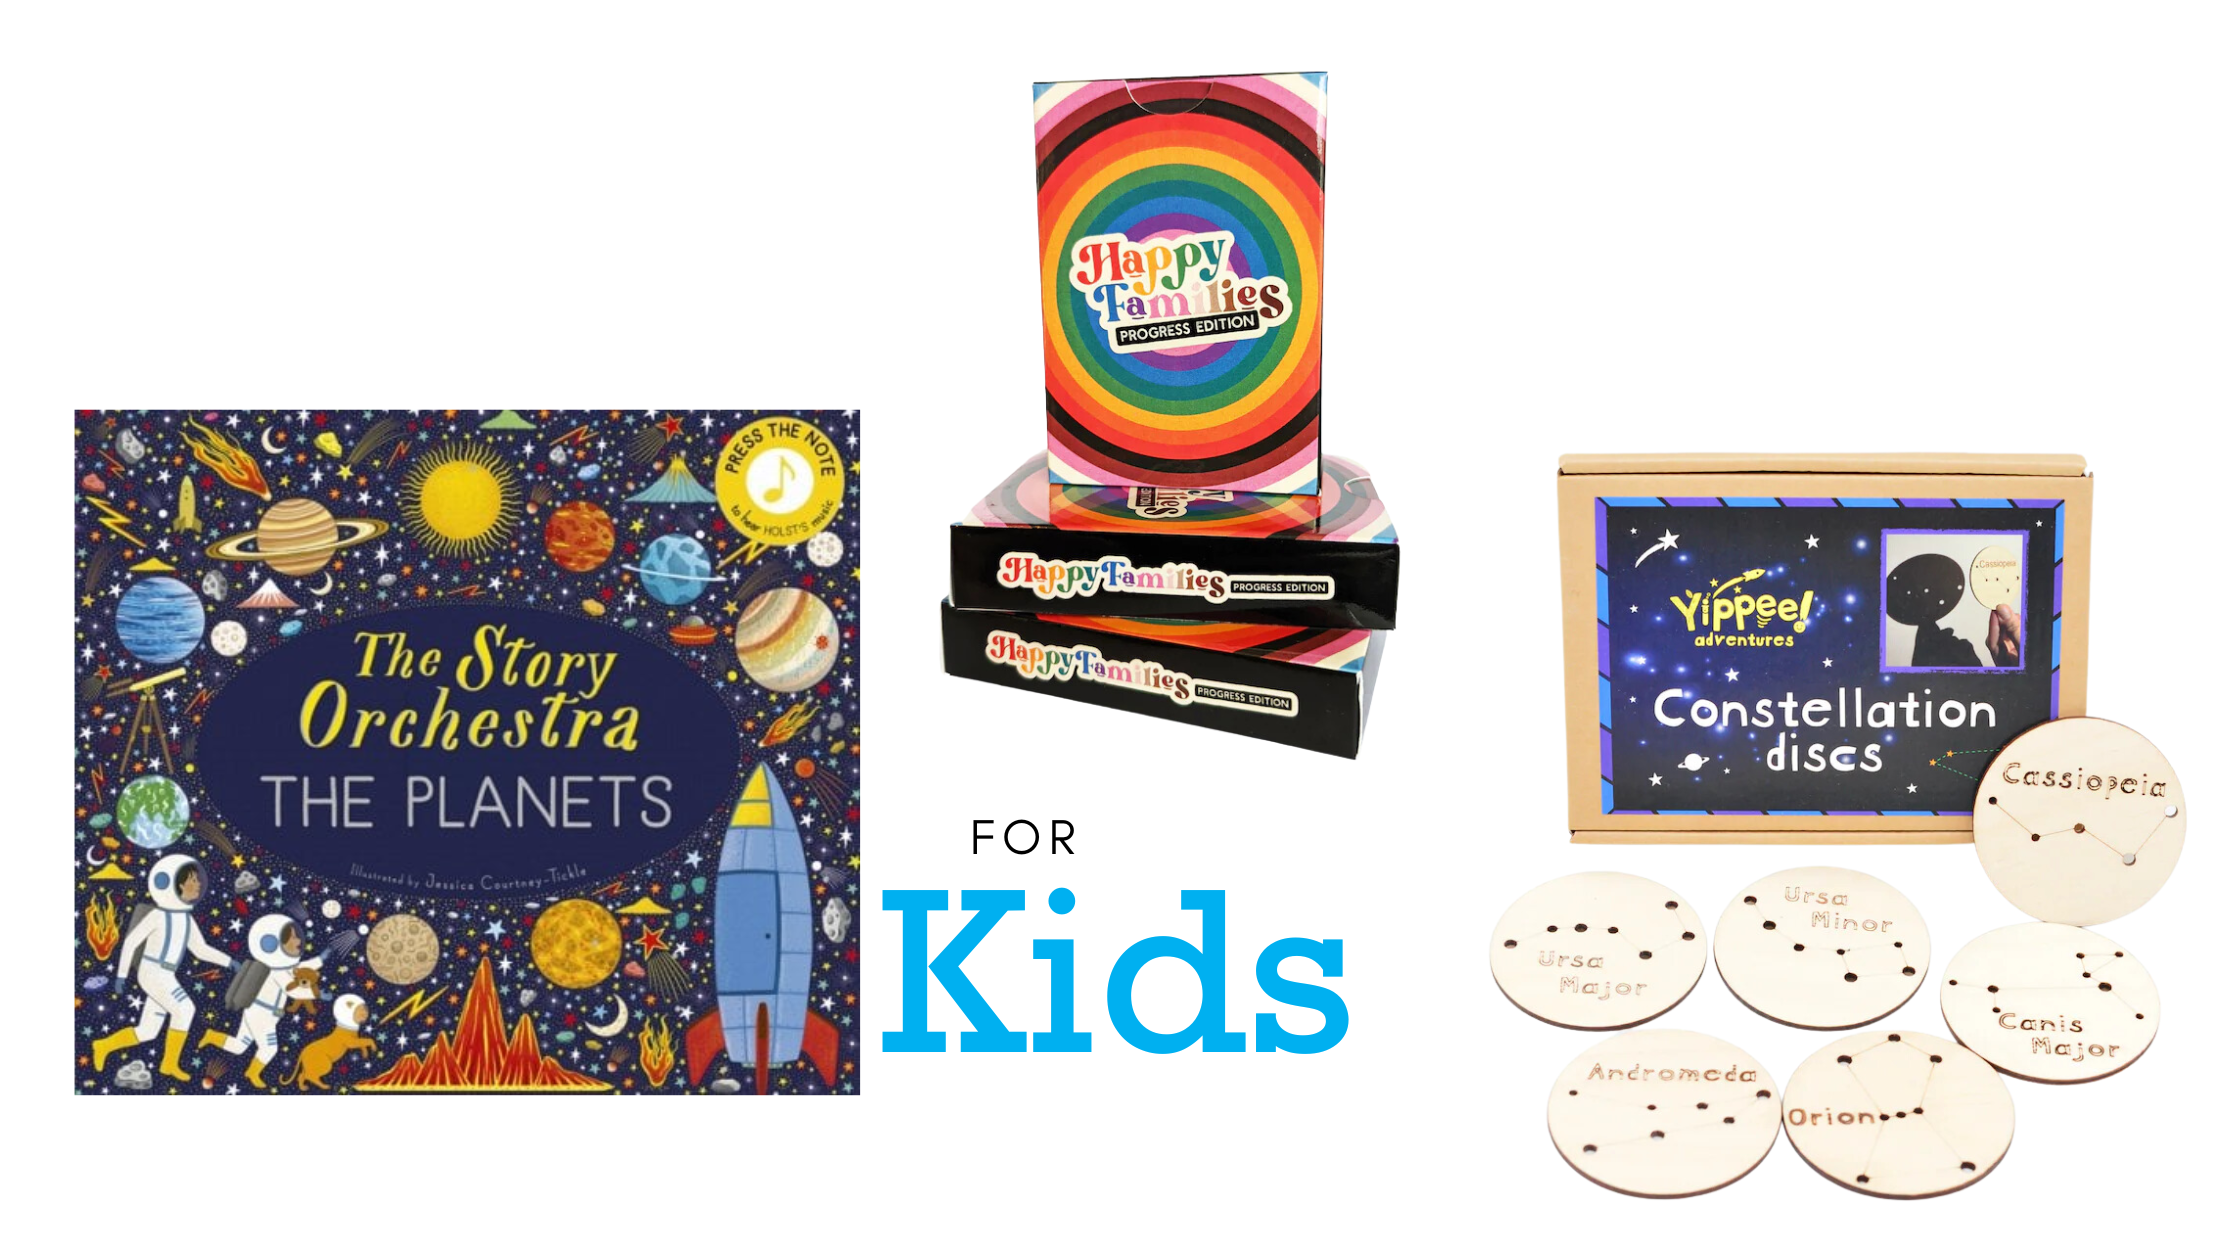 a book cover, wooden disks that reveal constellations and happy families cards